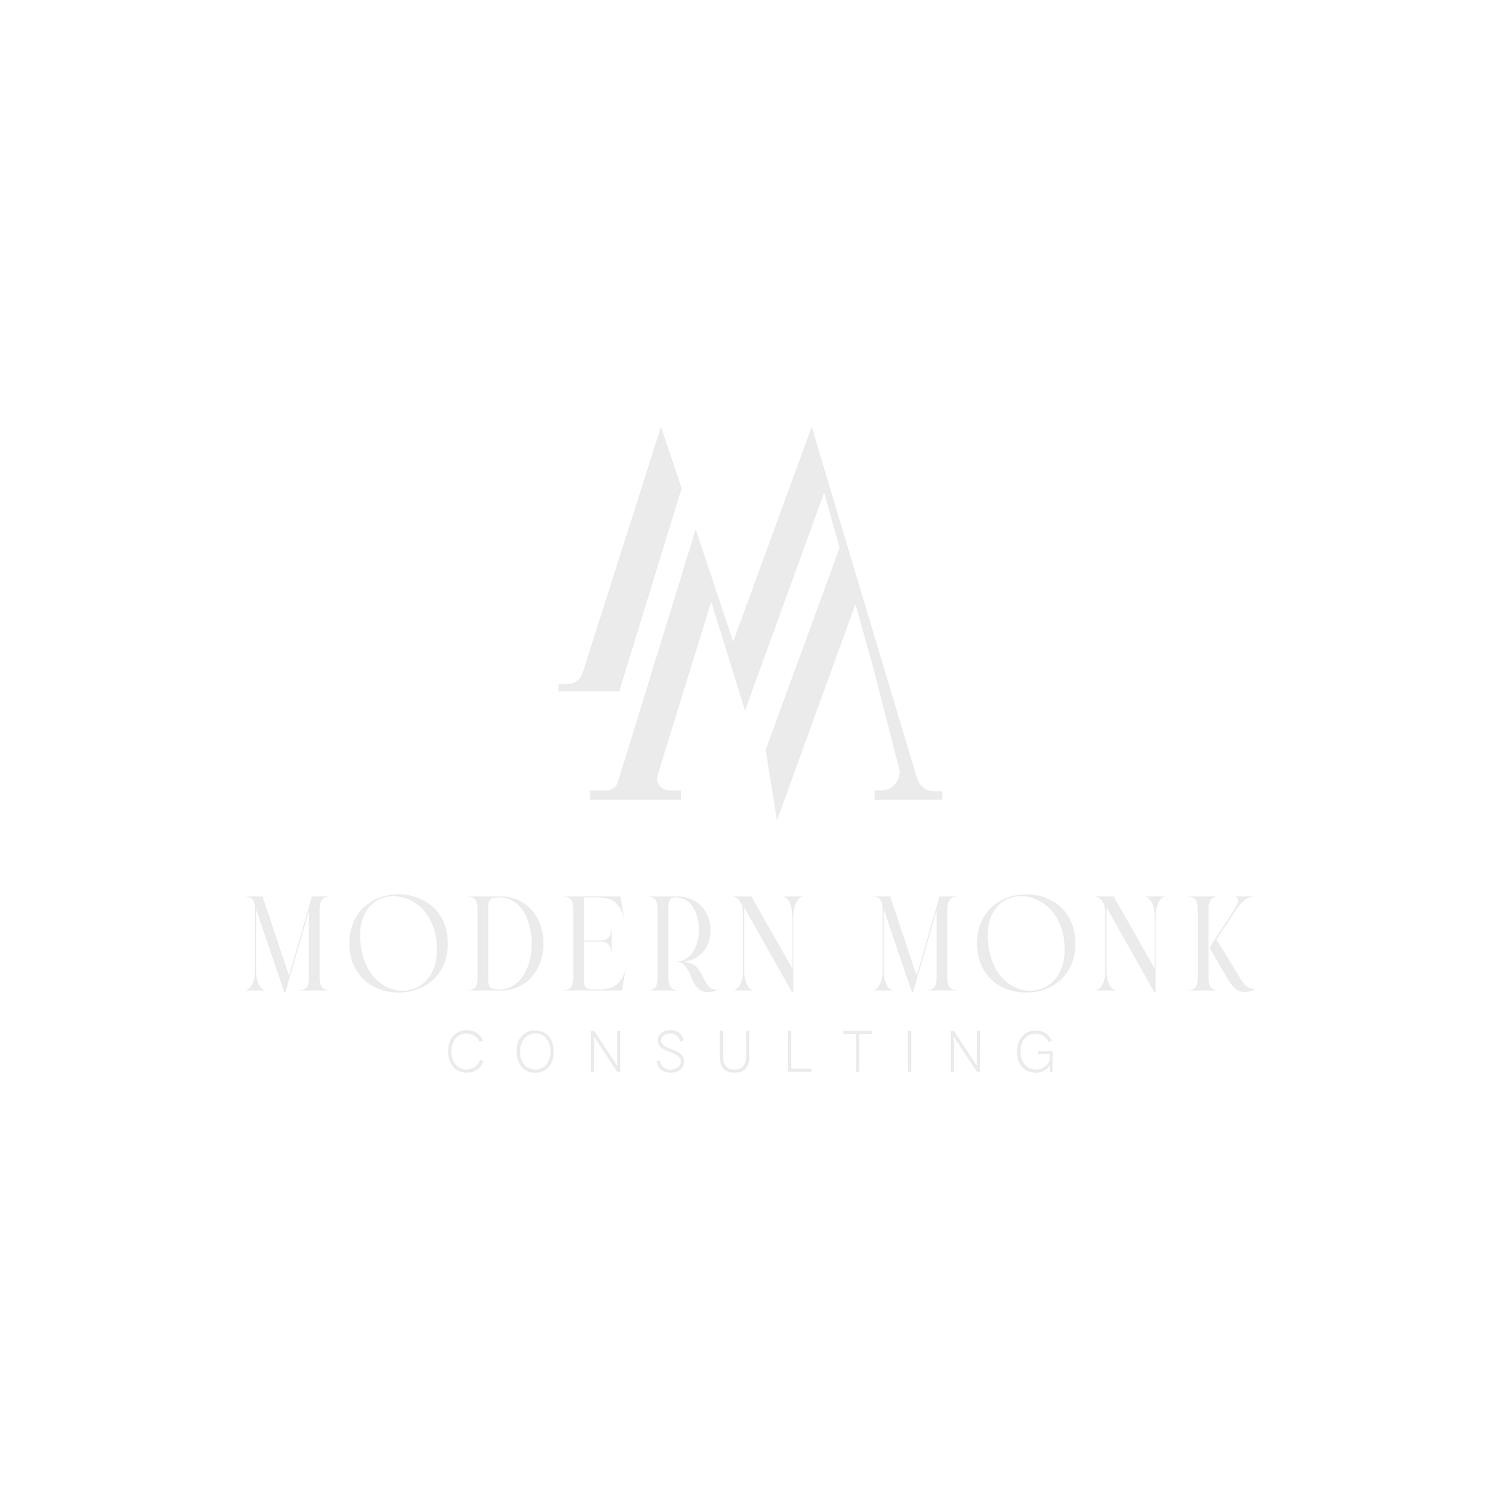 Modern Monk Consulting